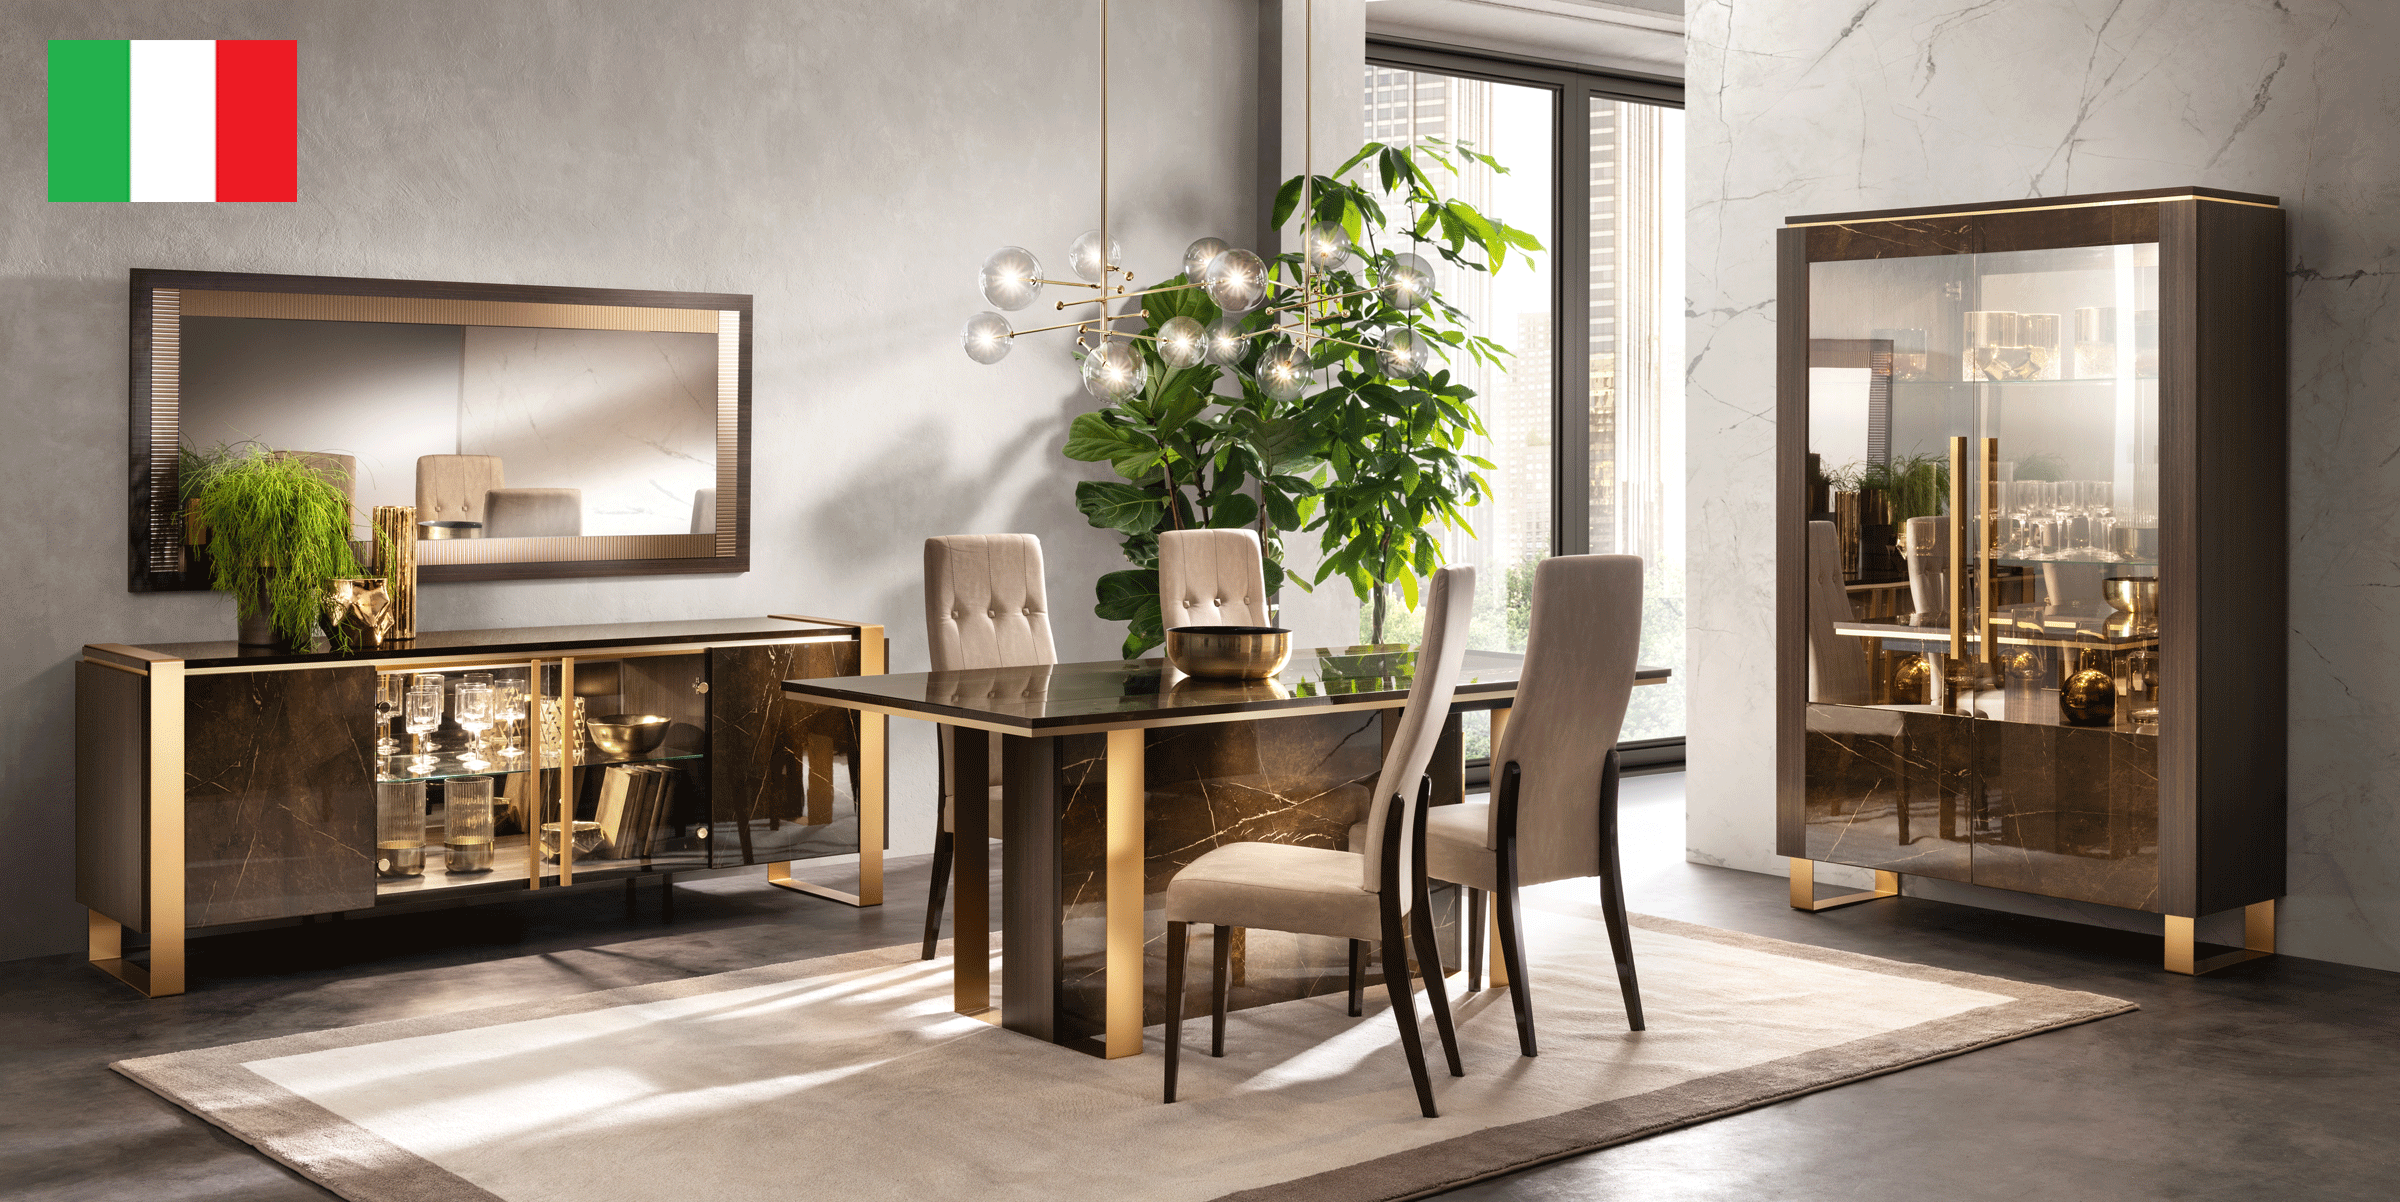 Dining Room Furniture China Cabinets and Buffets Essenza Dining by Arredoclassic, Italy